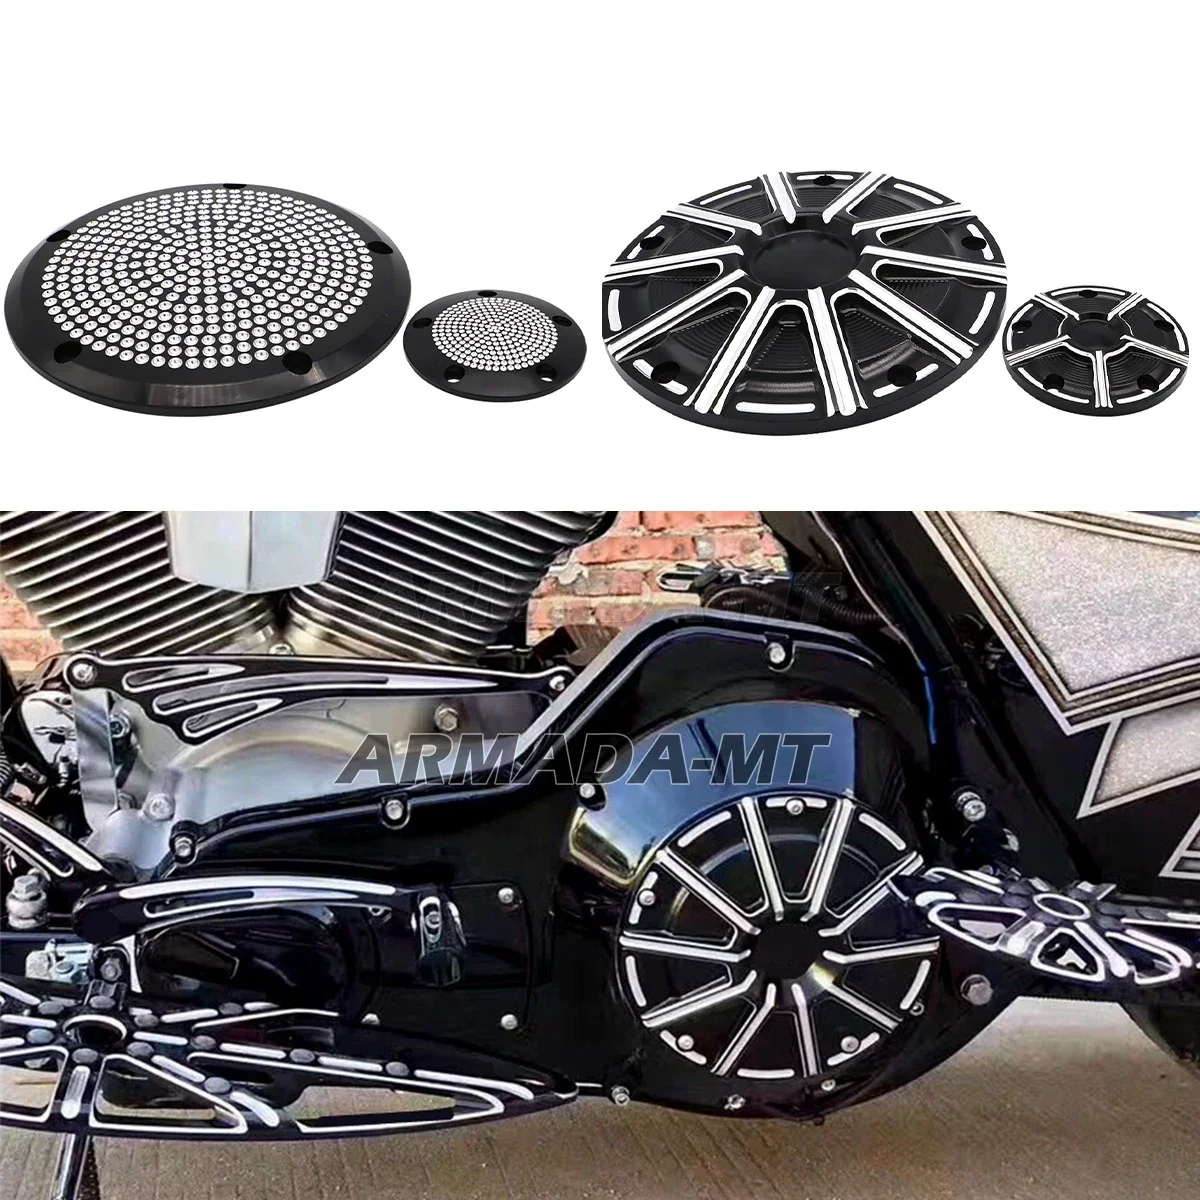 

For Harley Touring Street Glide Road King Dyna FXDC Softail Heritage Fat boy Motorcycle Parts Derby Timer Clutch Timing Covers